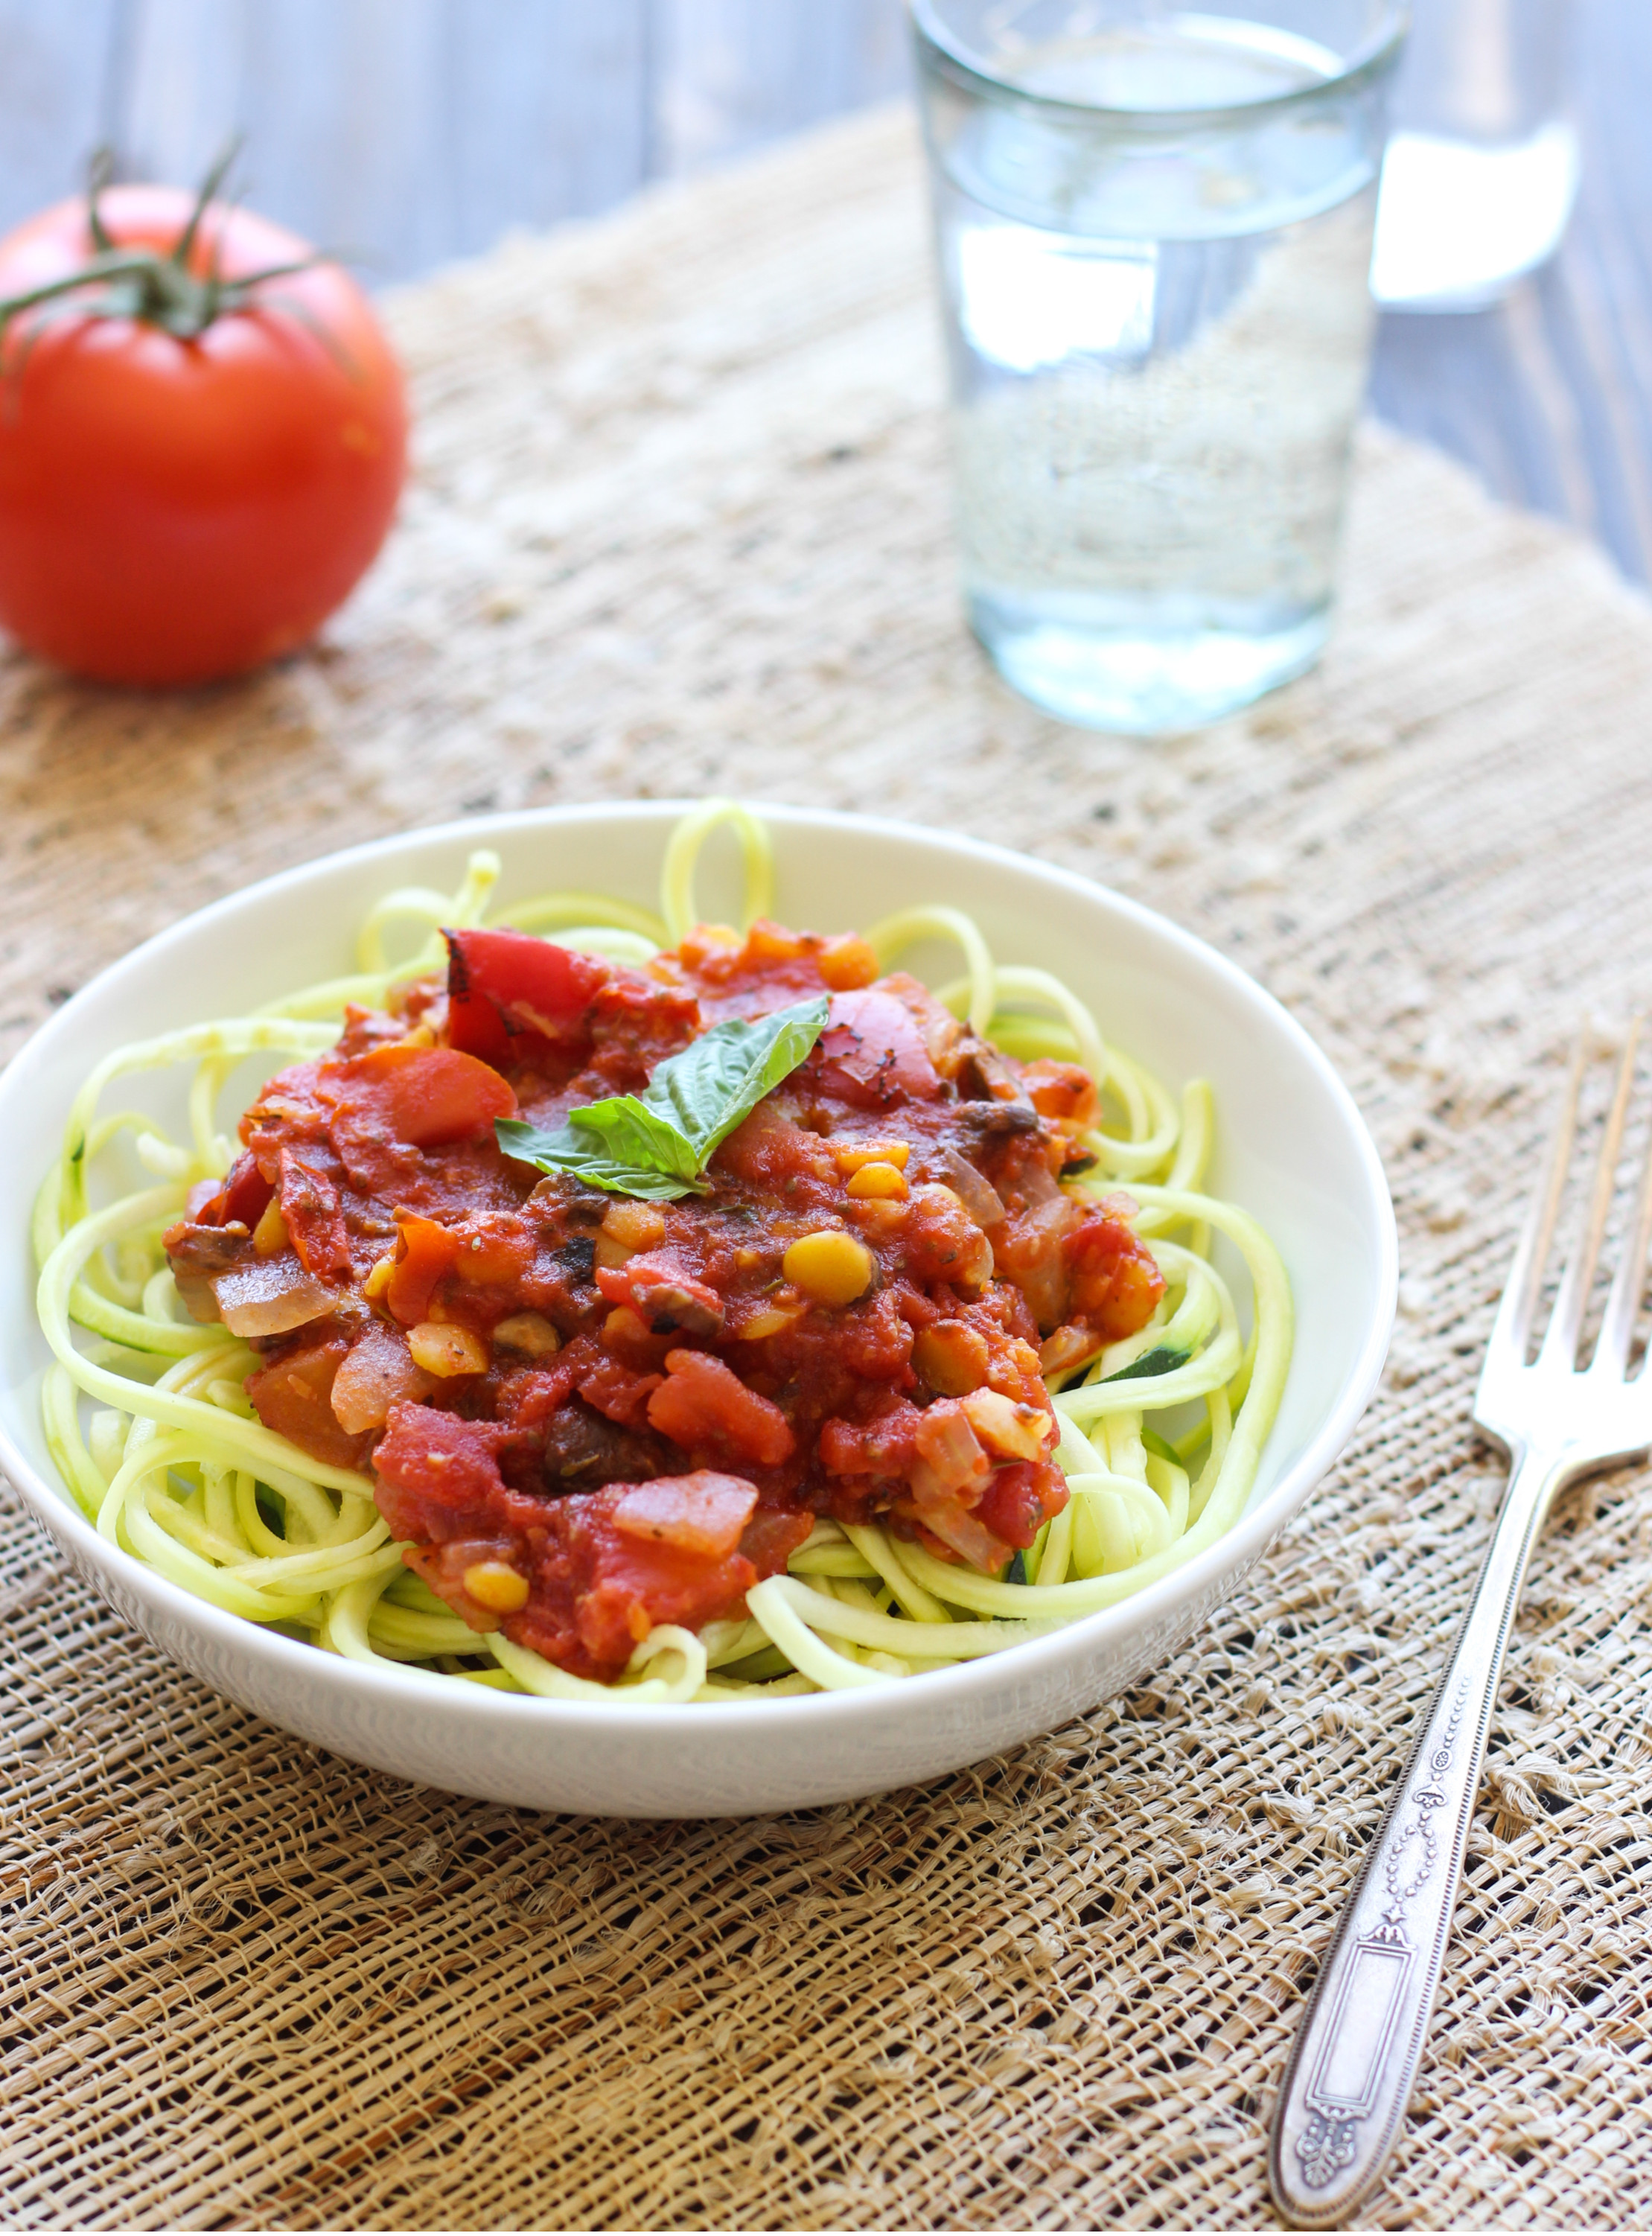 Immunity-Boosting Tomato Sauce with Mushrooms from the Oh She Glows Cookbook